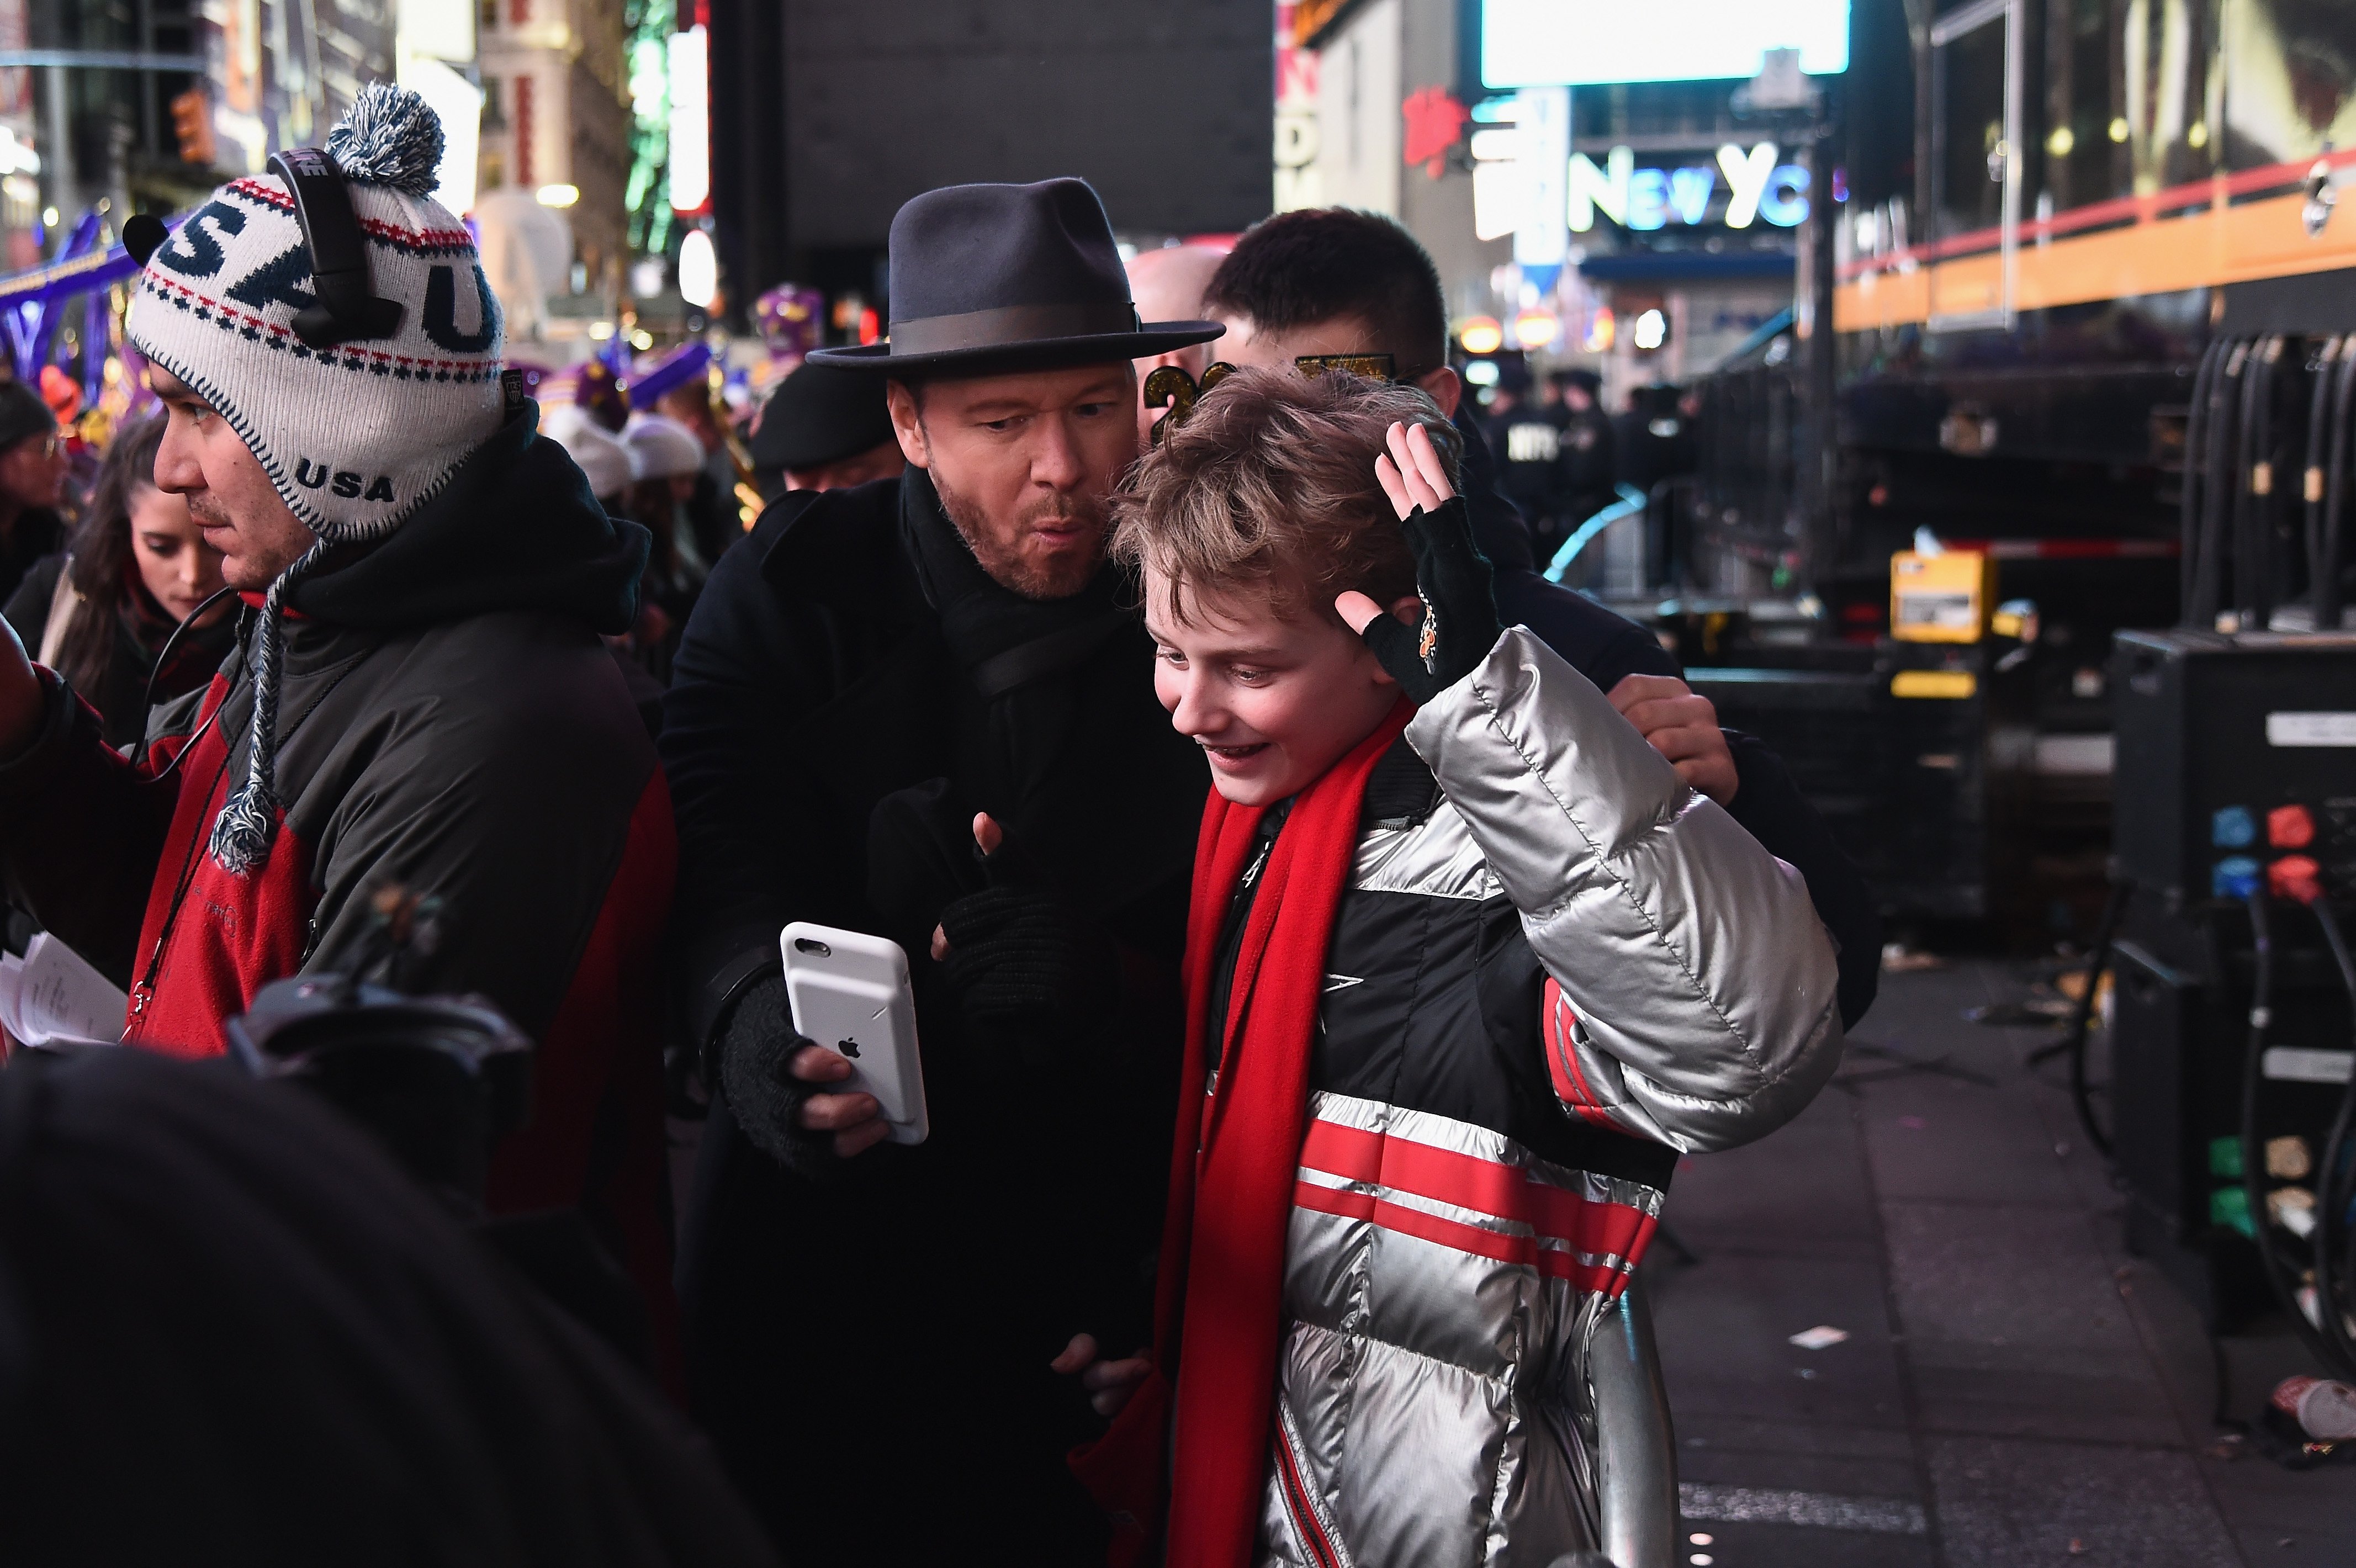 Donnie Wahlberg and Evan Joseph Asher pose for selfies during Dick Clark's New Year's Rockin' Eve 2017 at Times Square on December 31, 2016 in New York City | Source: Getty Images 